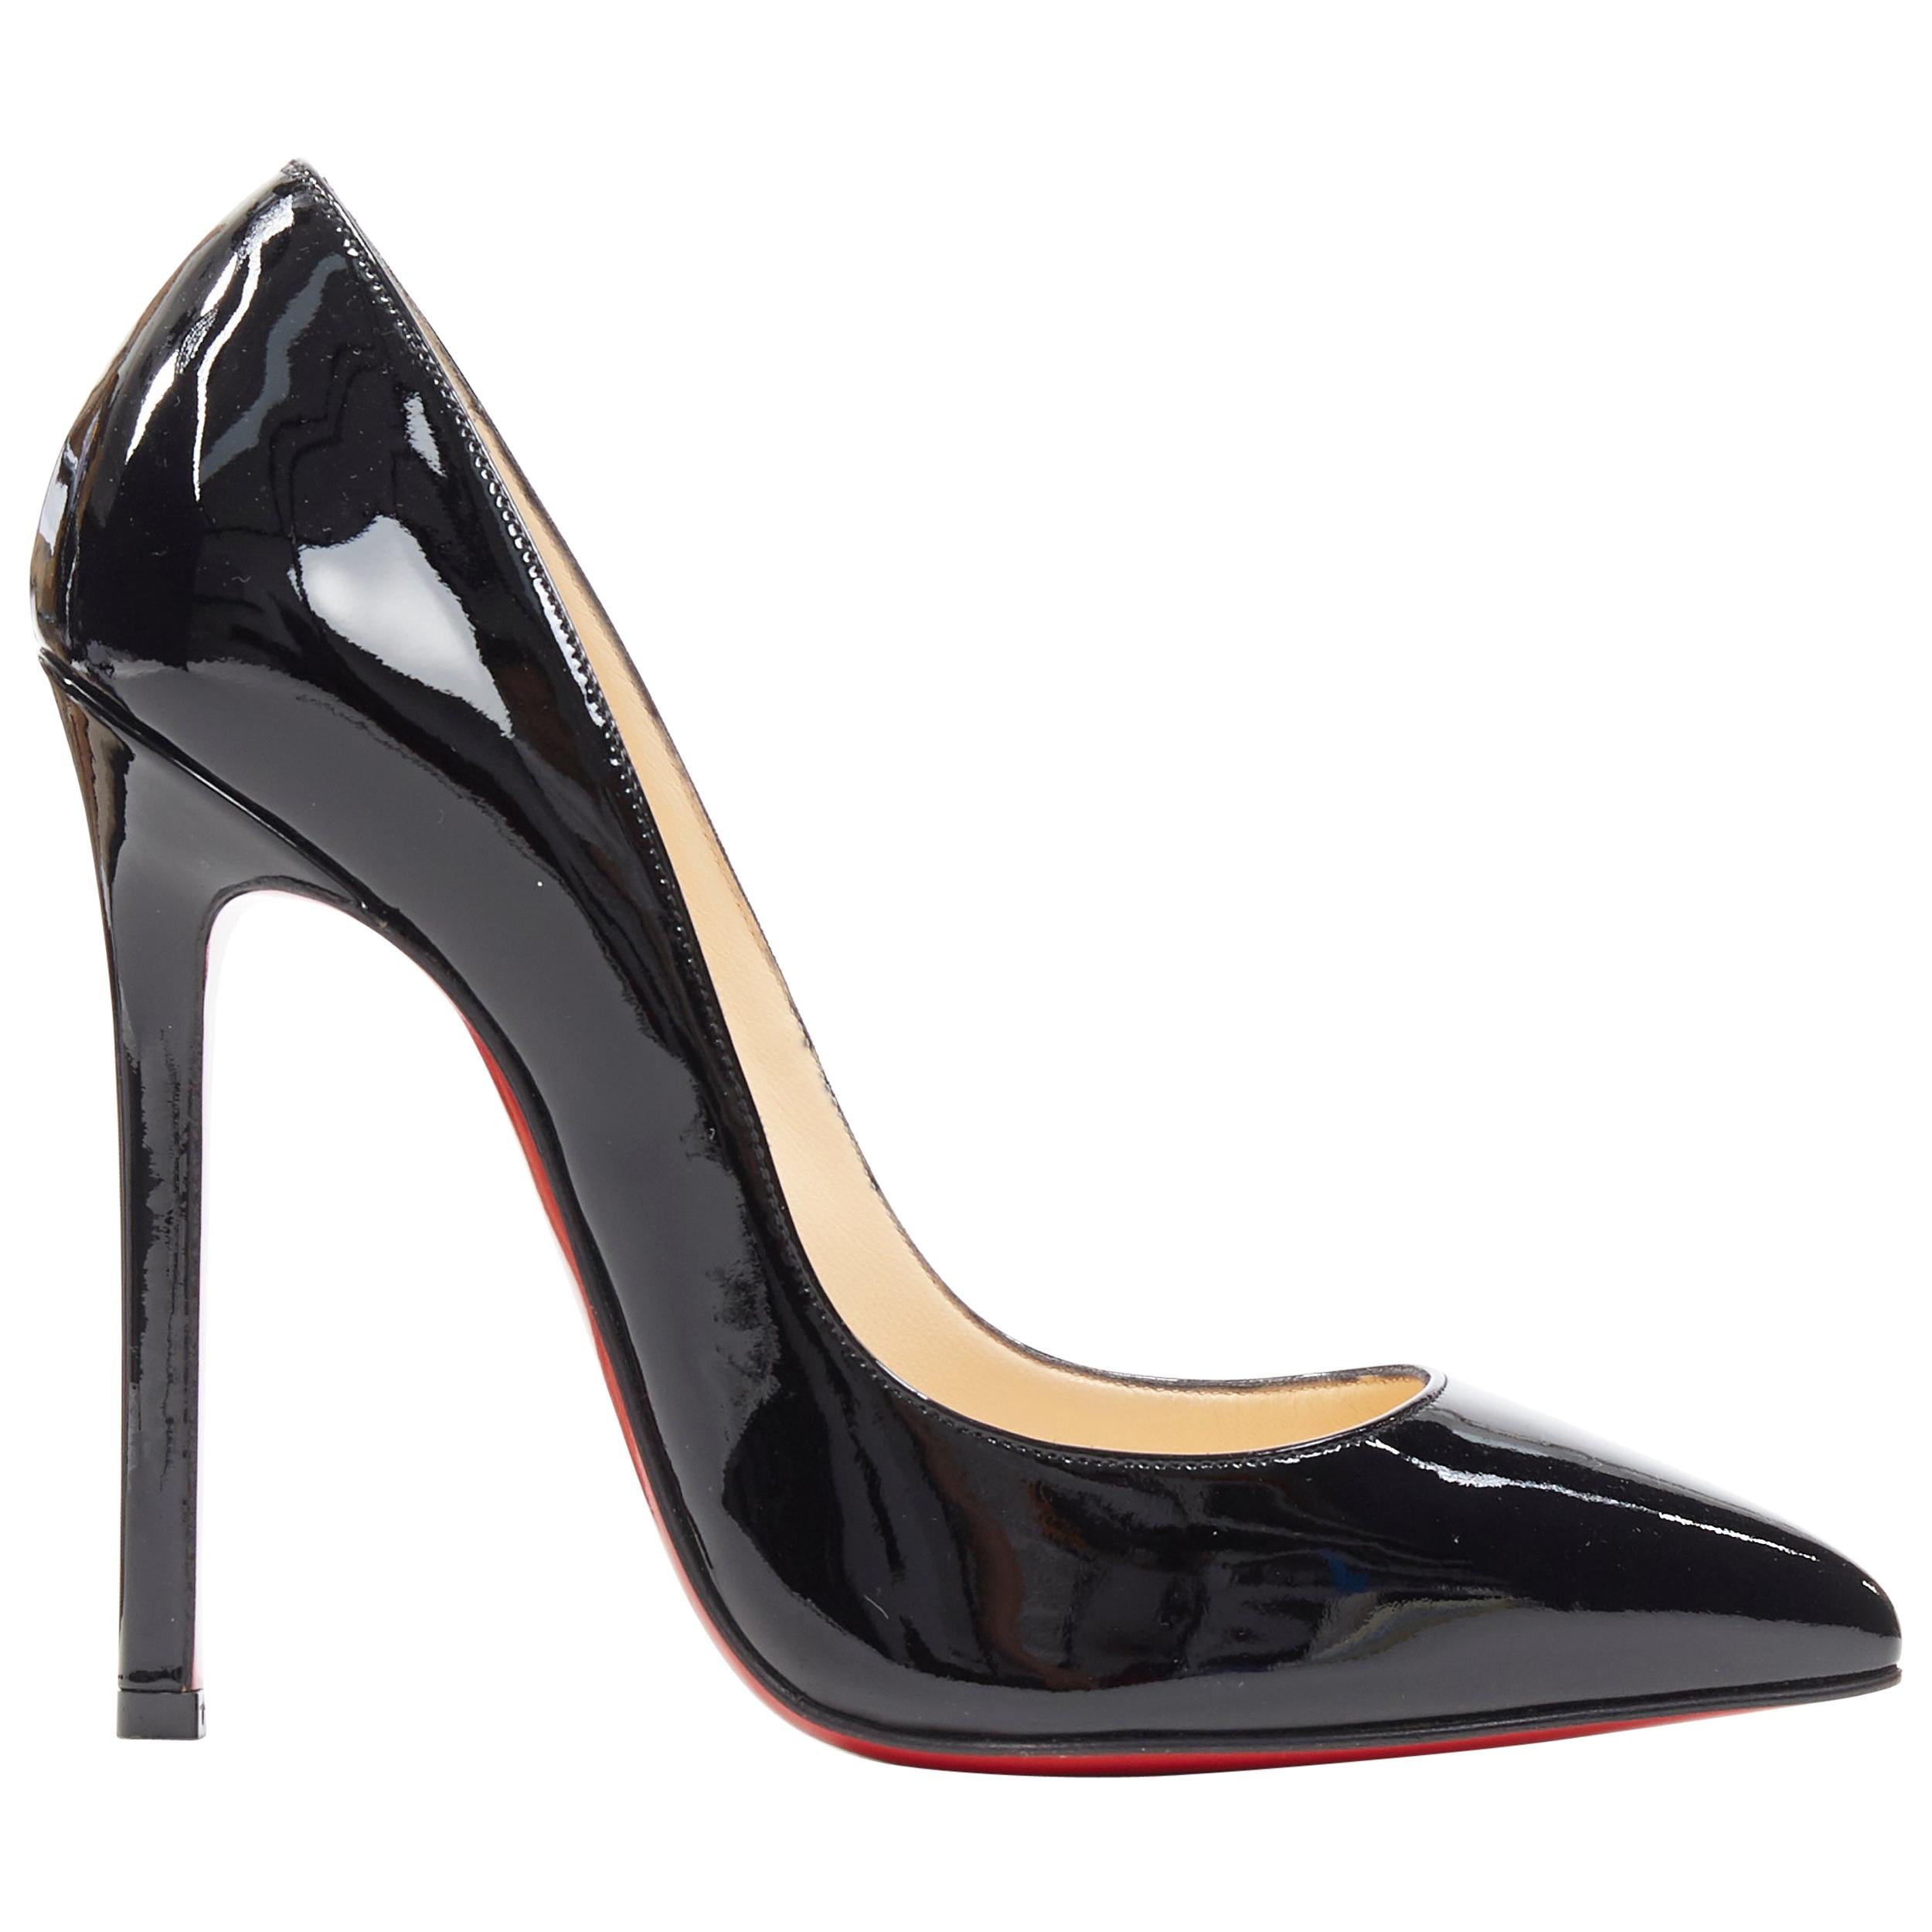 CHRISTIAN LOUBOUTIN black patent pointed toe pigalle high heel pump EU36.5